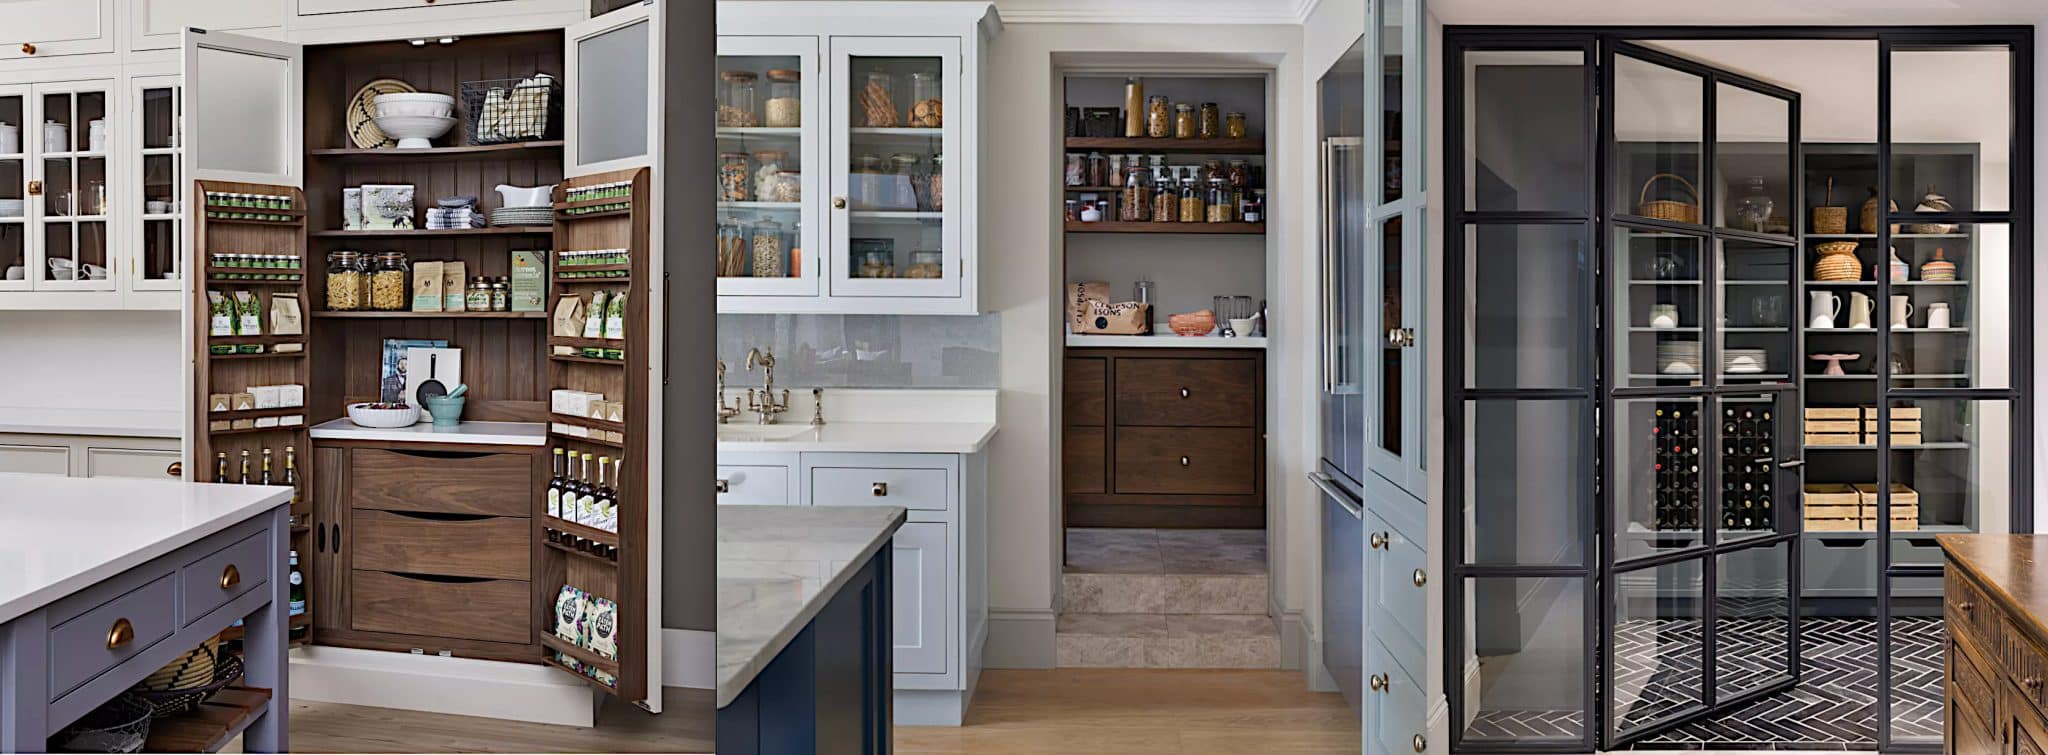 How to Select the Right Flooring for a Fancy Pantry Space?